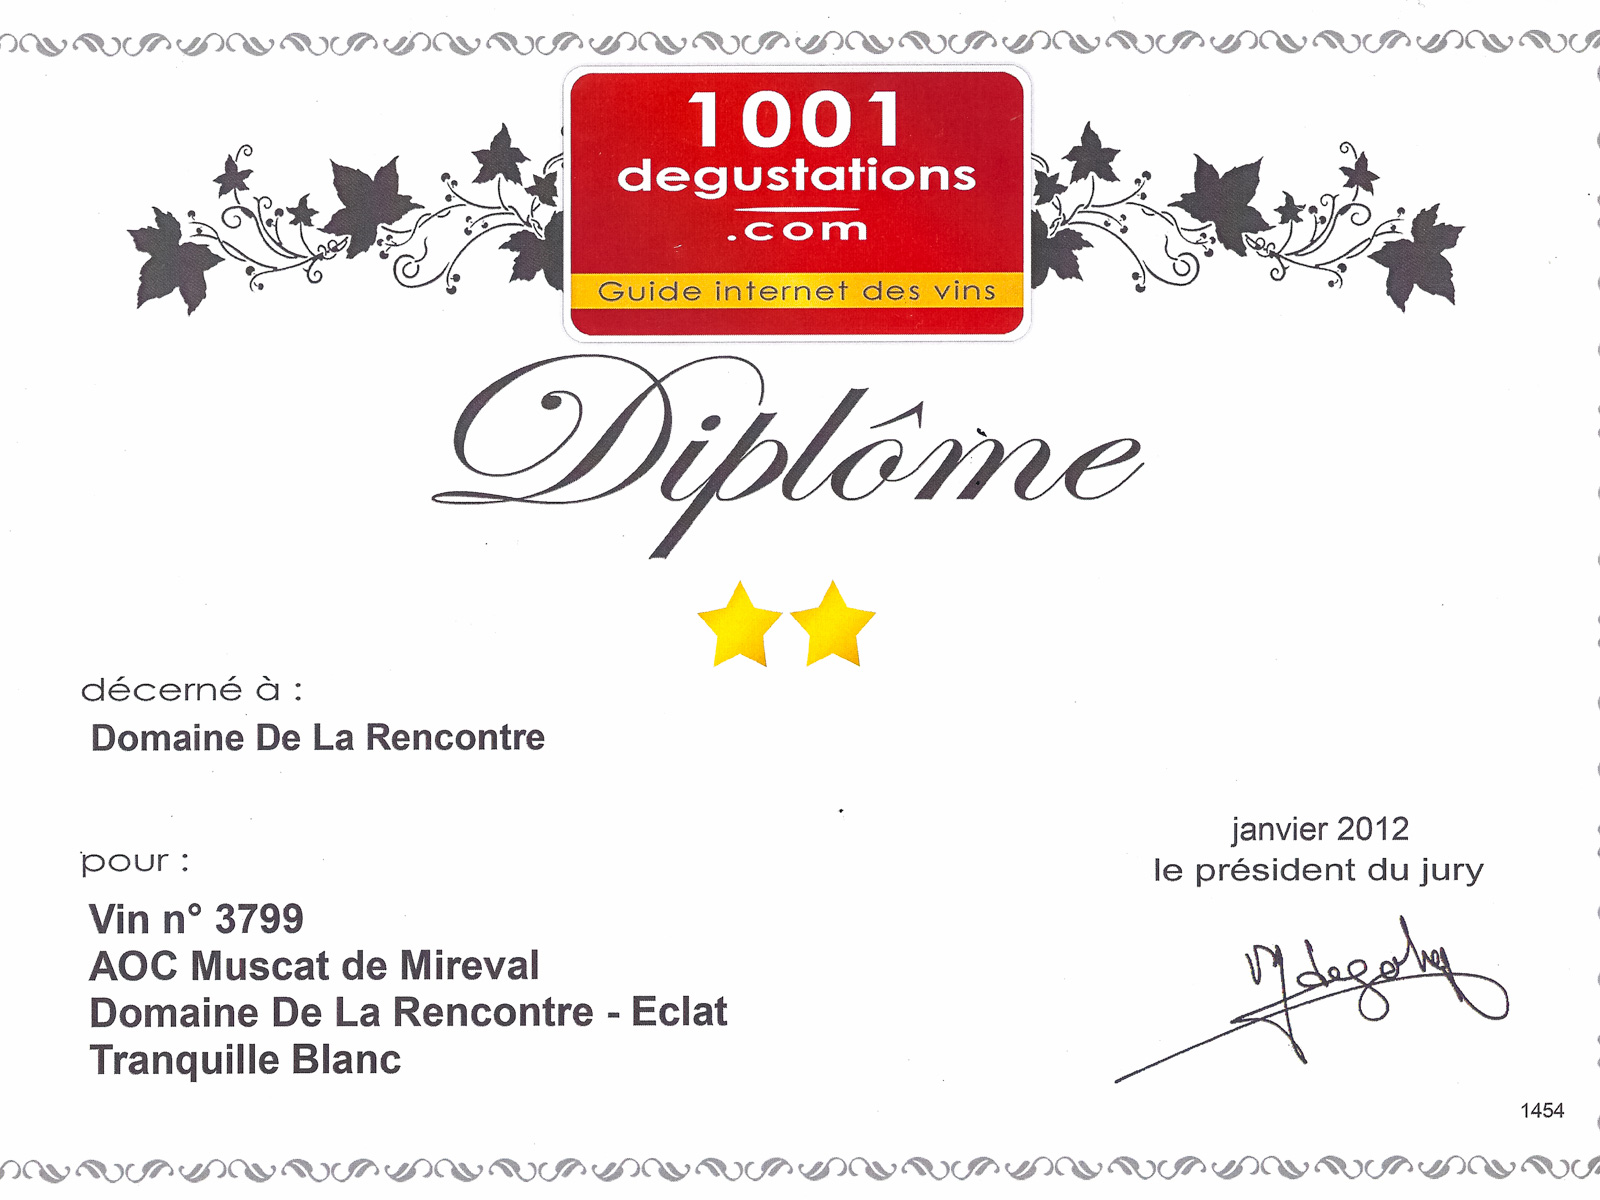 vin muscat medaille recompense domaine rencontre mireval